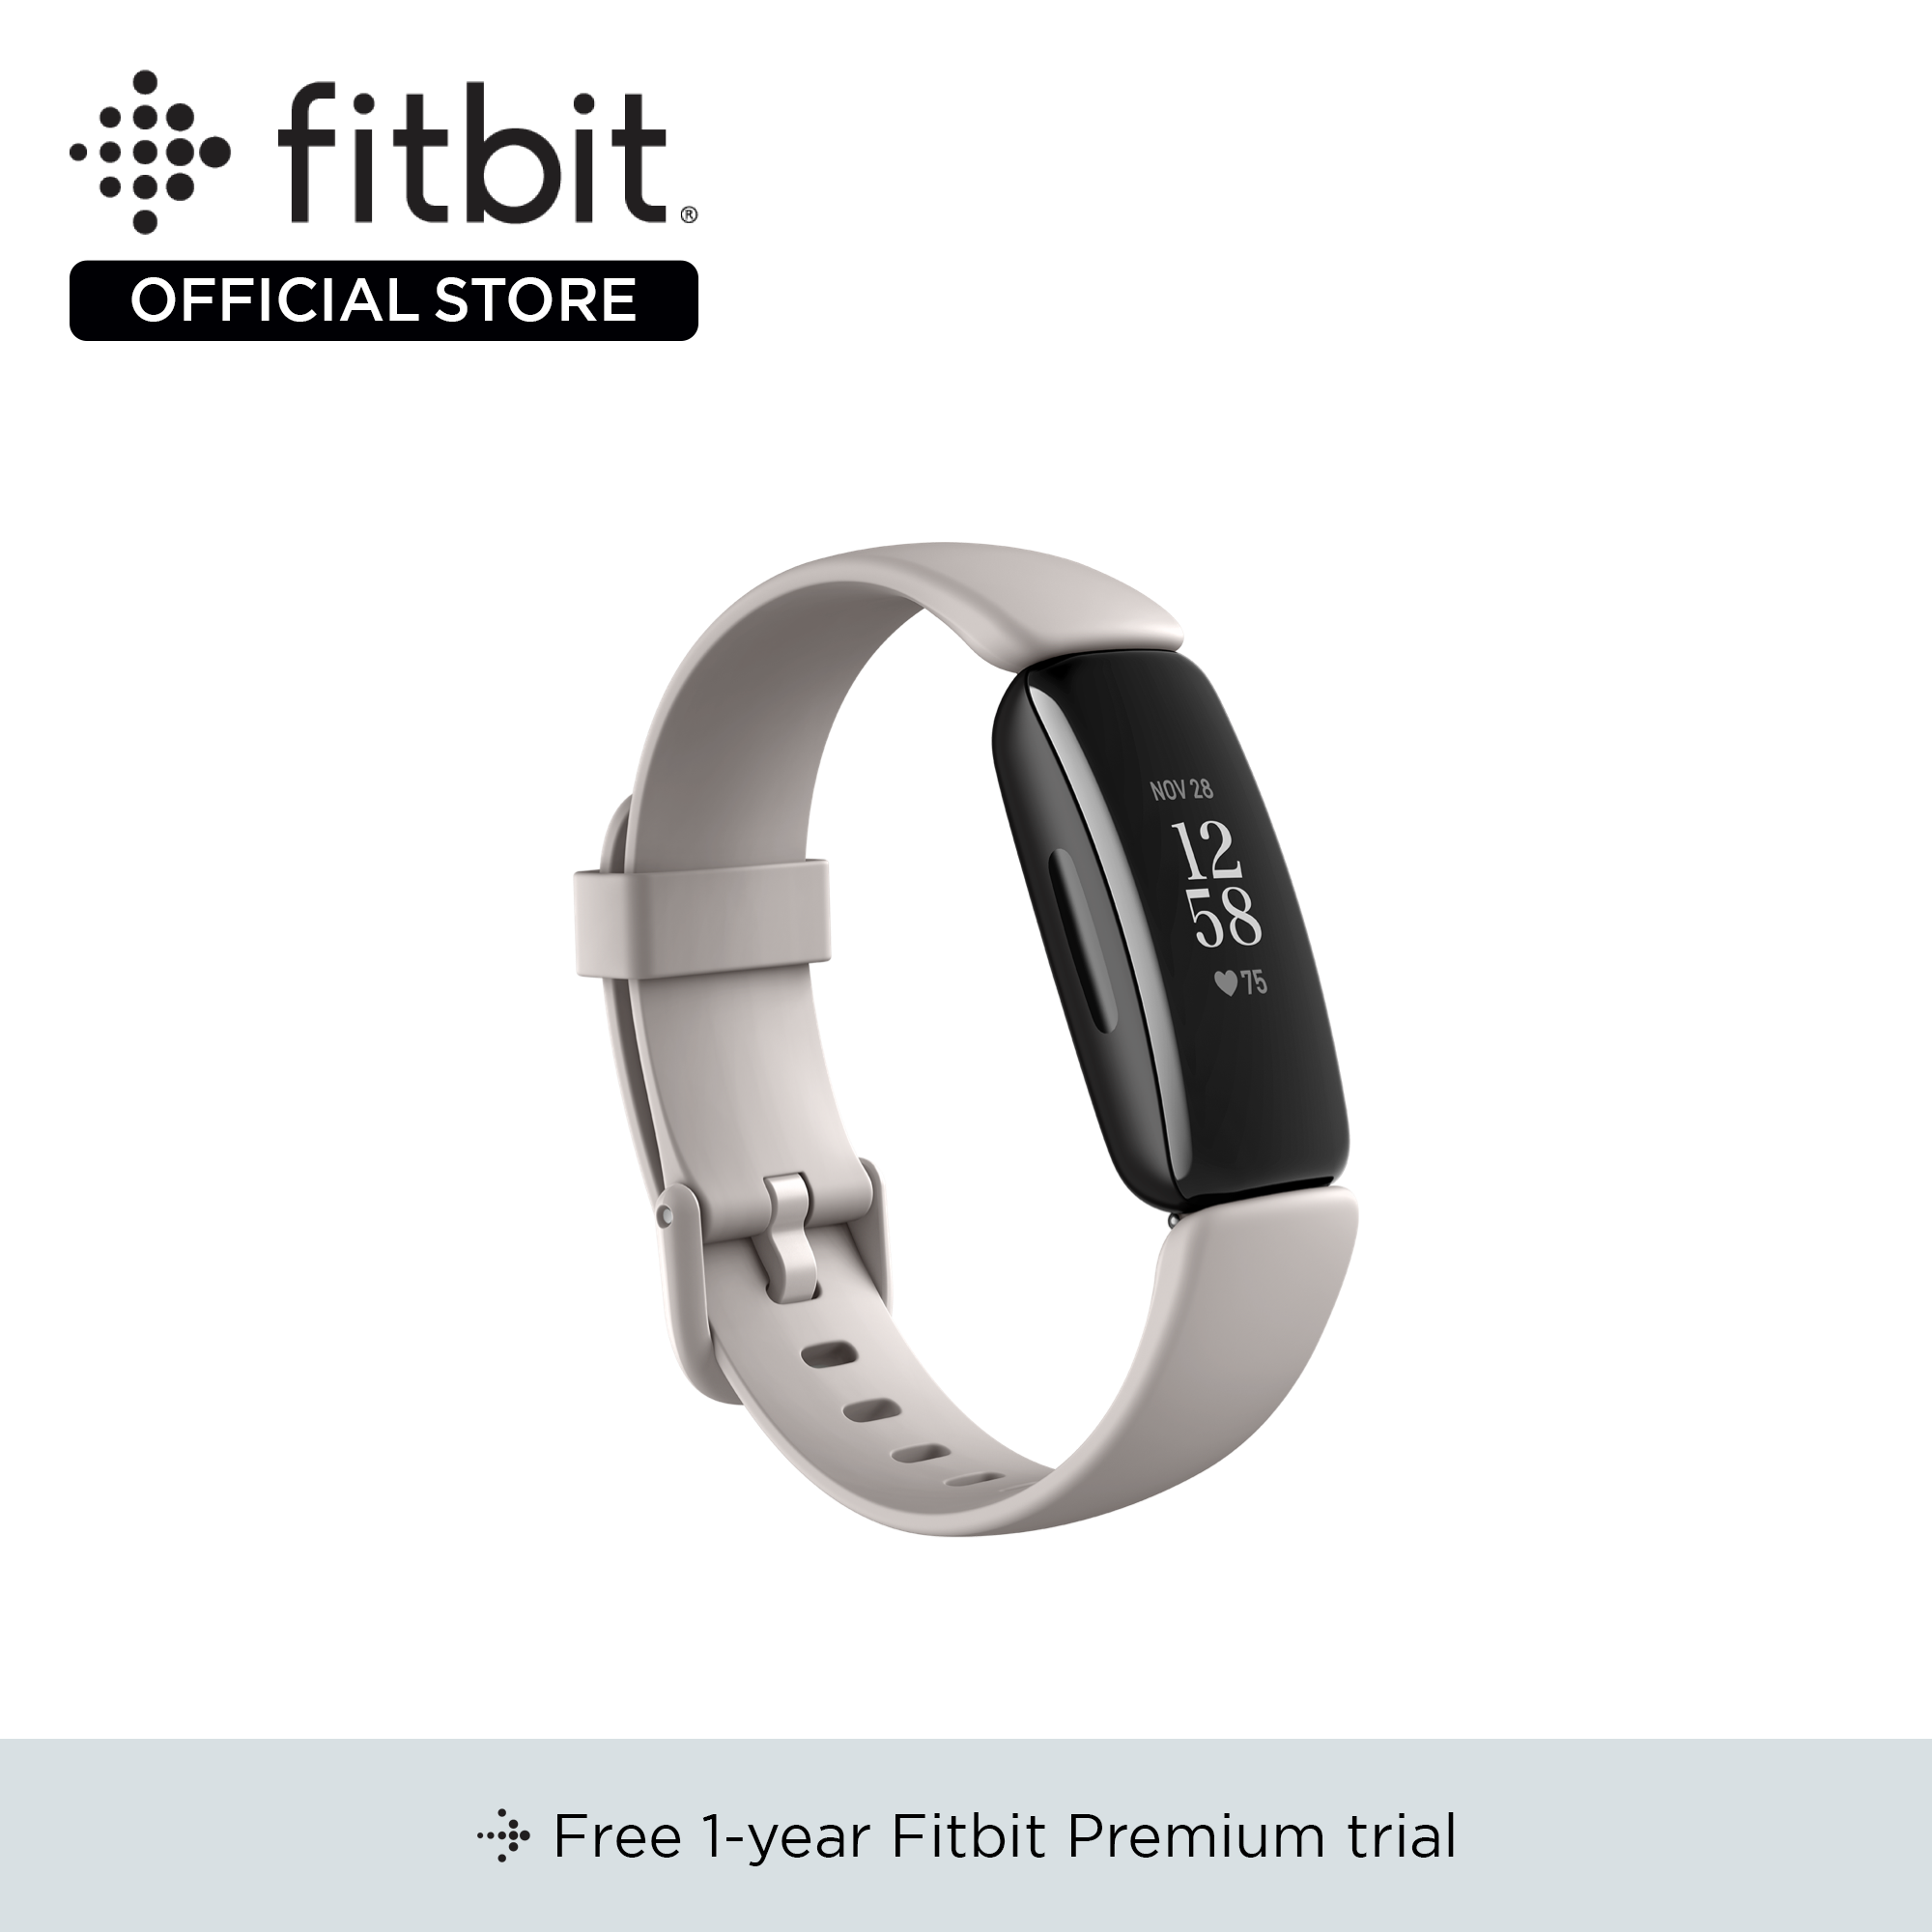 Buy Fitbit at Best Price in Philippines 